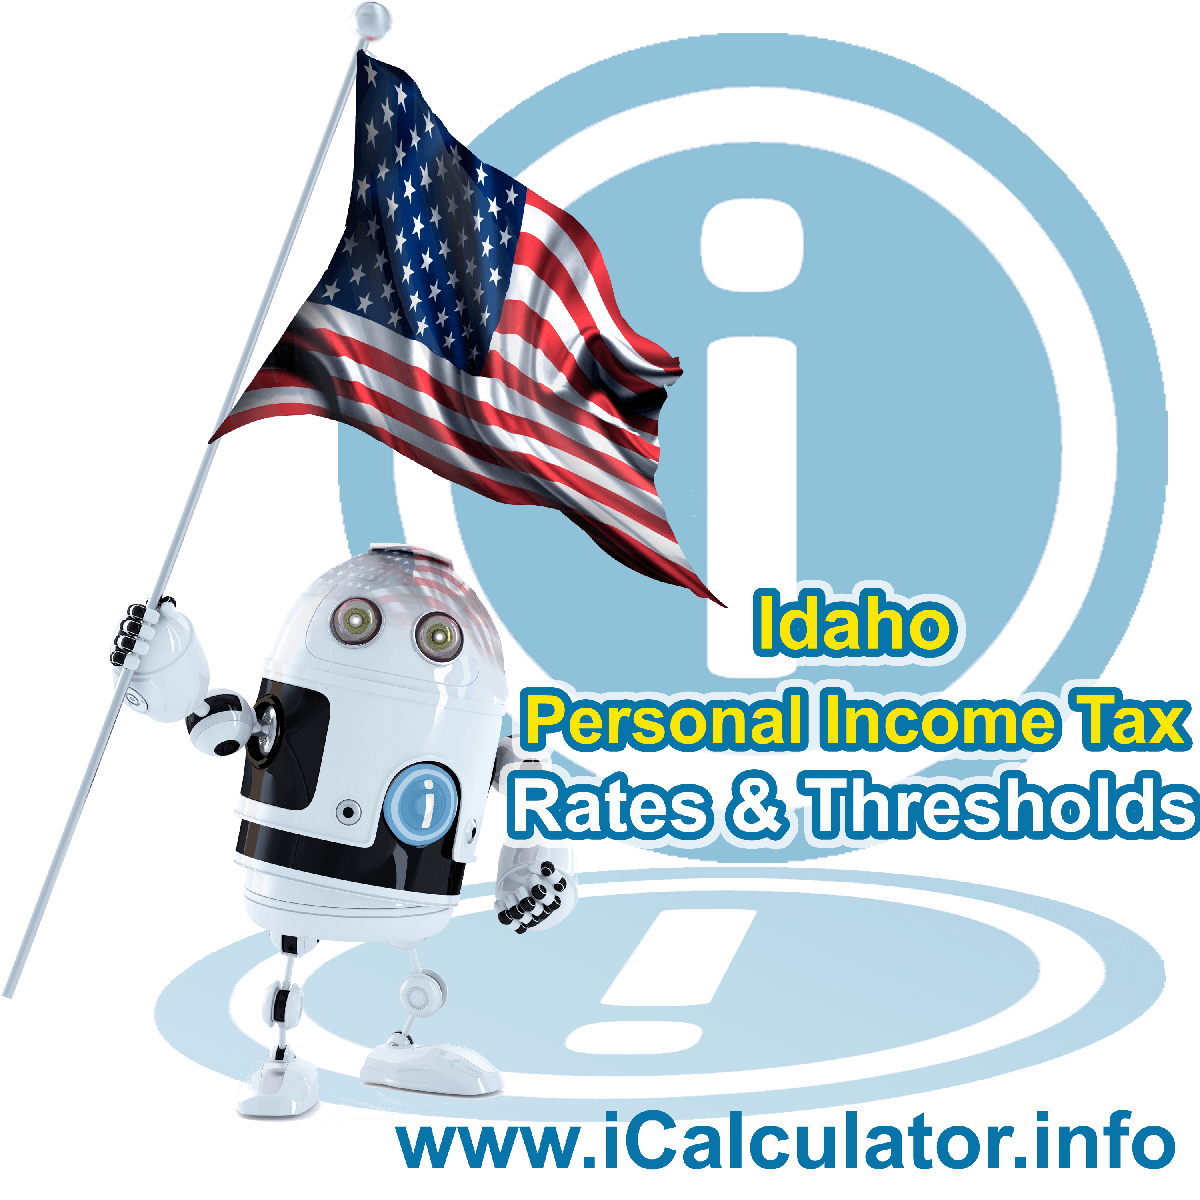 Idaho State Tax Tables 2015. This image displays details of the Idaho State Tax Tables for the 2015 tax return year which is provided in support of the 2015 US Tax Calculator